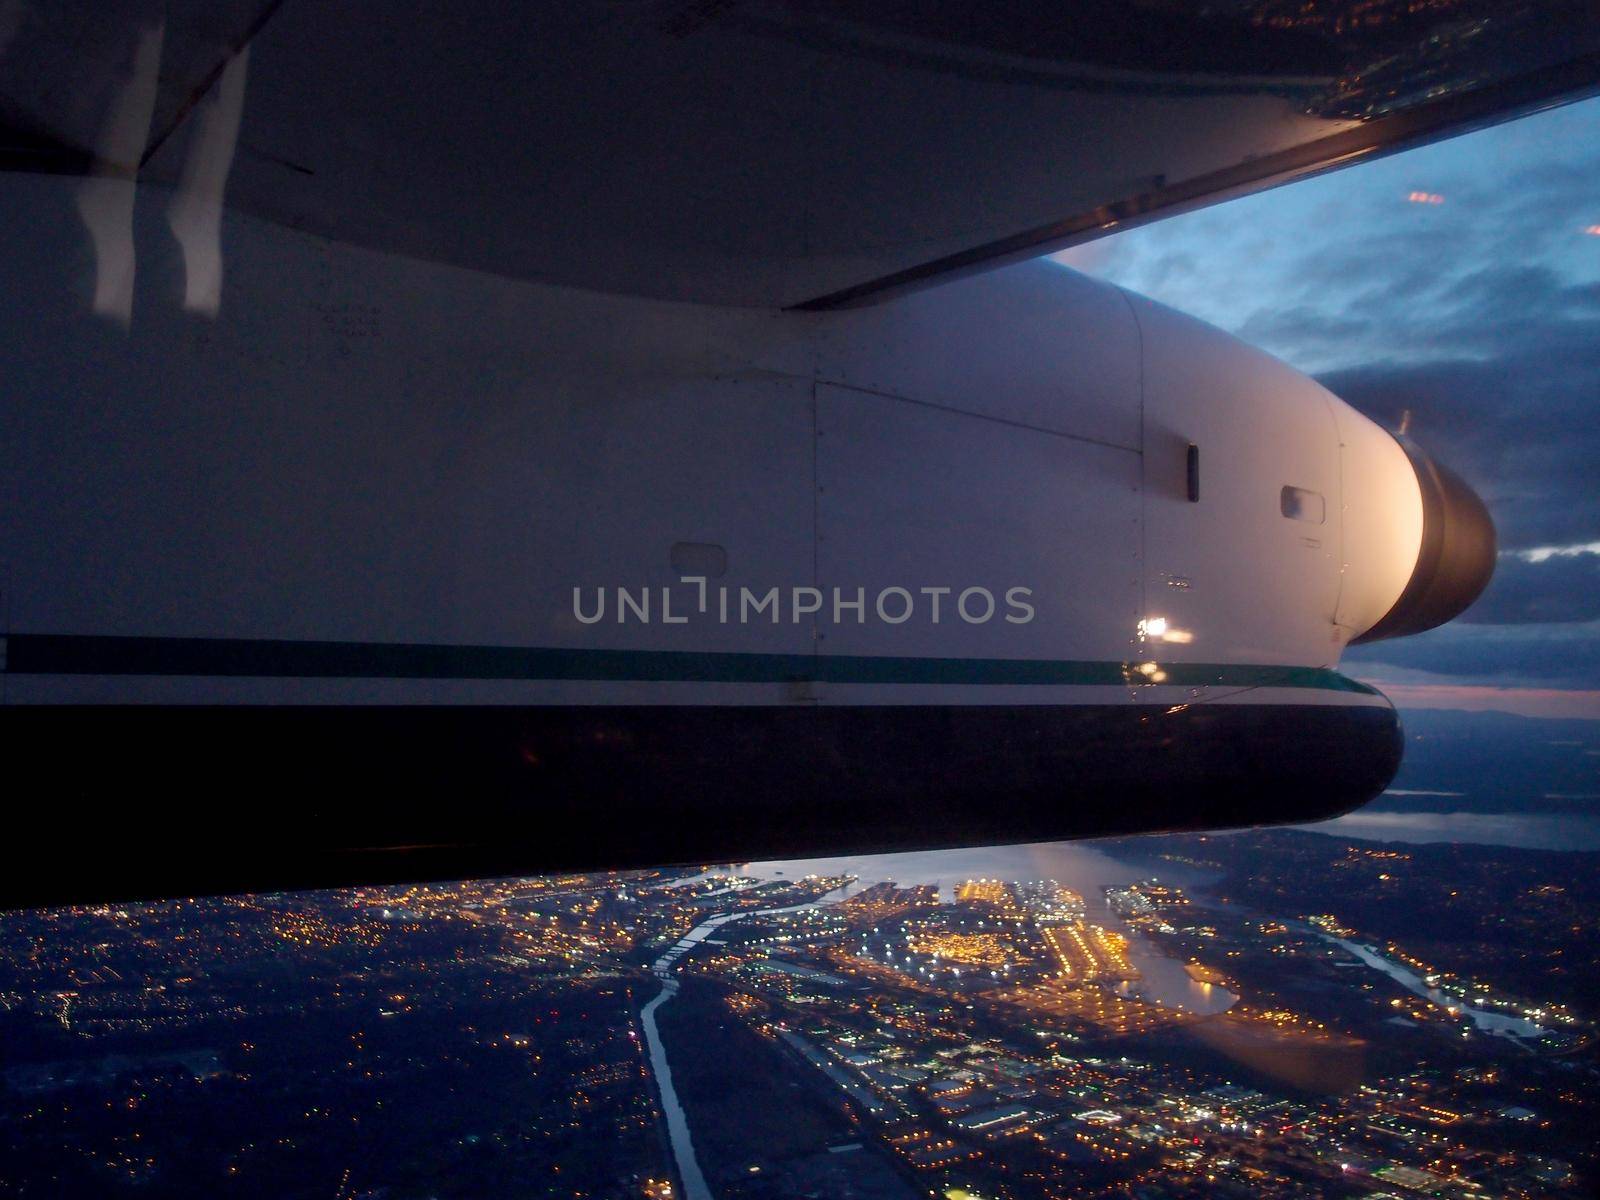 Plane Propeller Wing flies over City of Seattle, Washington at night.